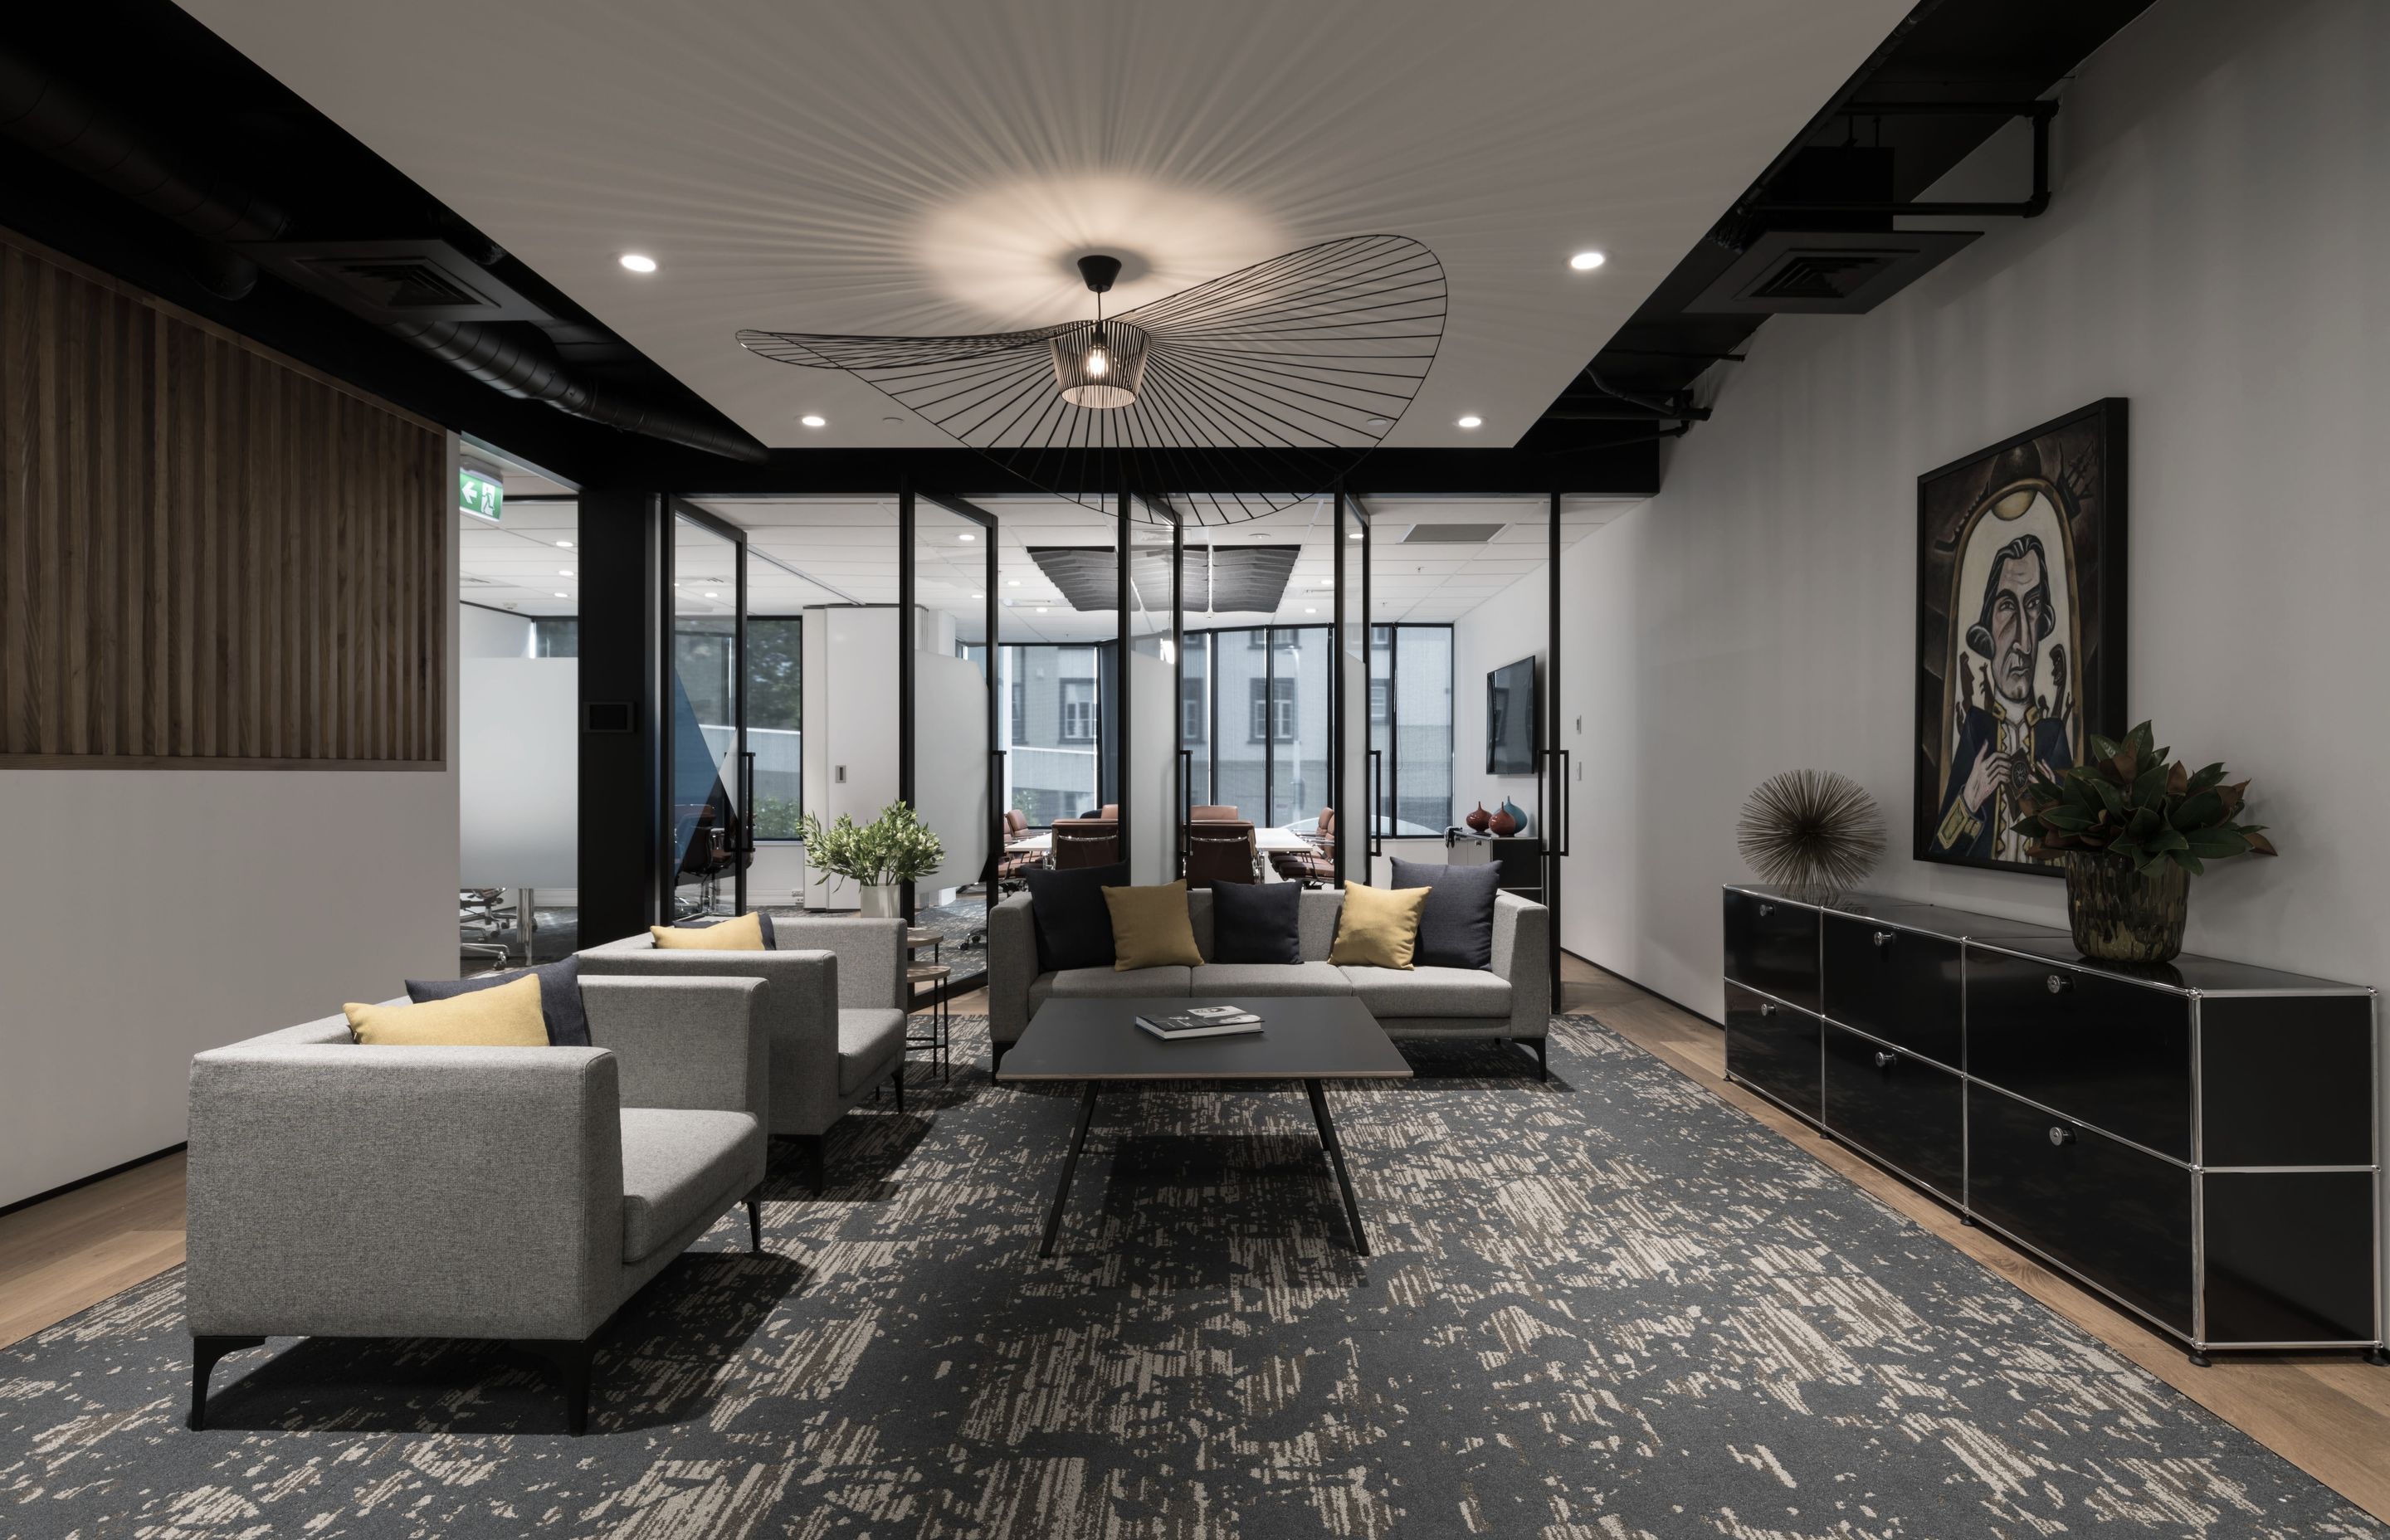 Reception lounge with feature carpet and wood frame flooring, with an operable wall to separate, or join, flexible meeting spaces beyond